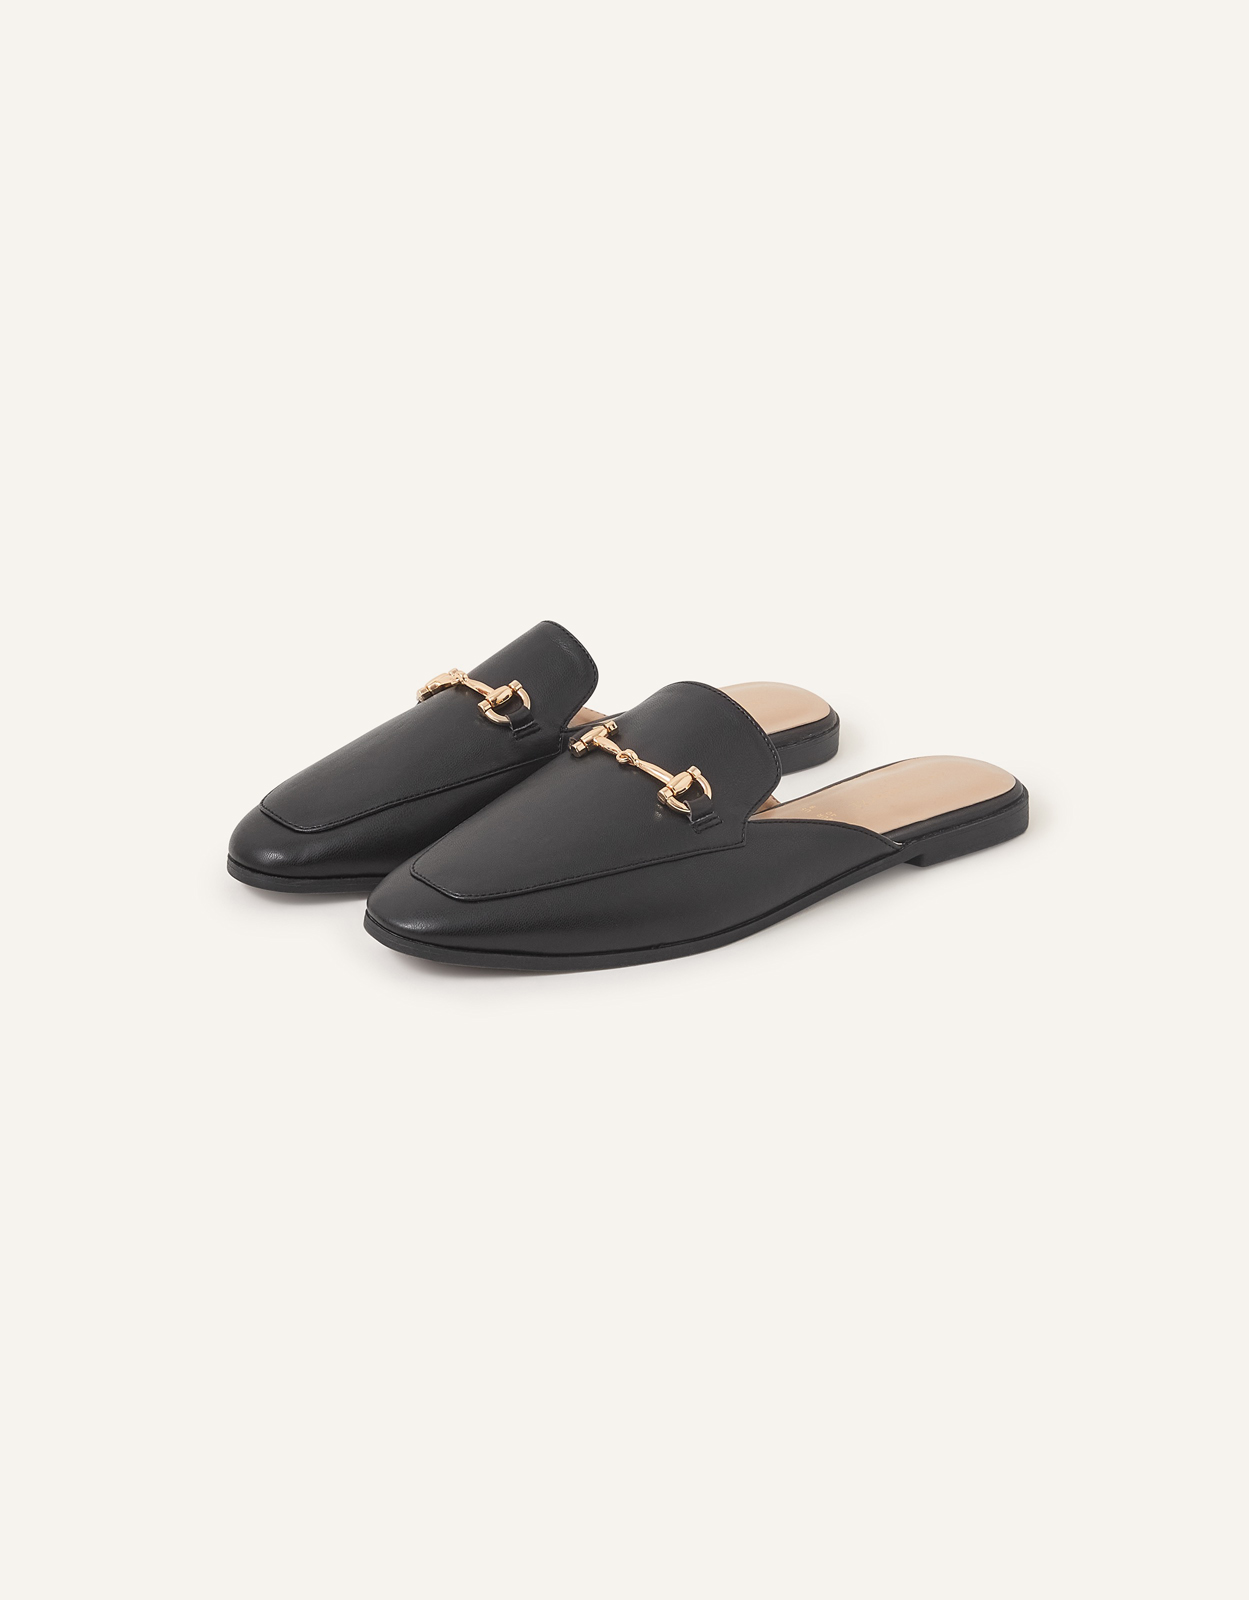 Accessorize Backless Loafers Black, Size: 37